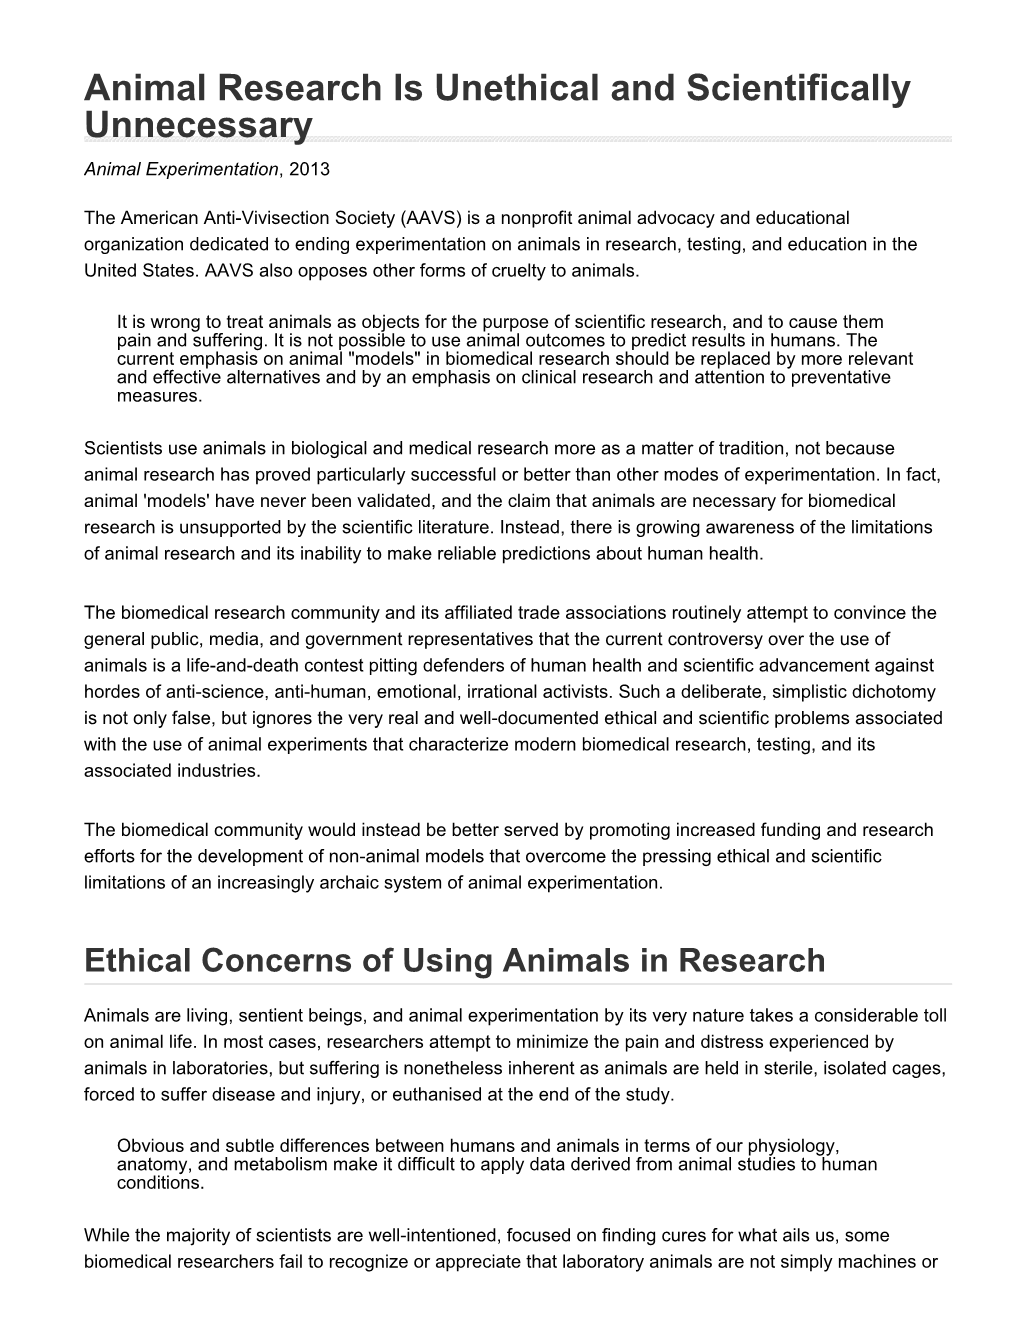 Animal Research Is Unethical and Scientifically Unnecessary Animal Experimentation, 2013